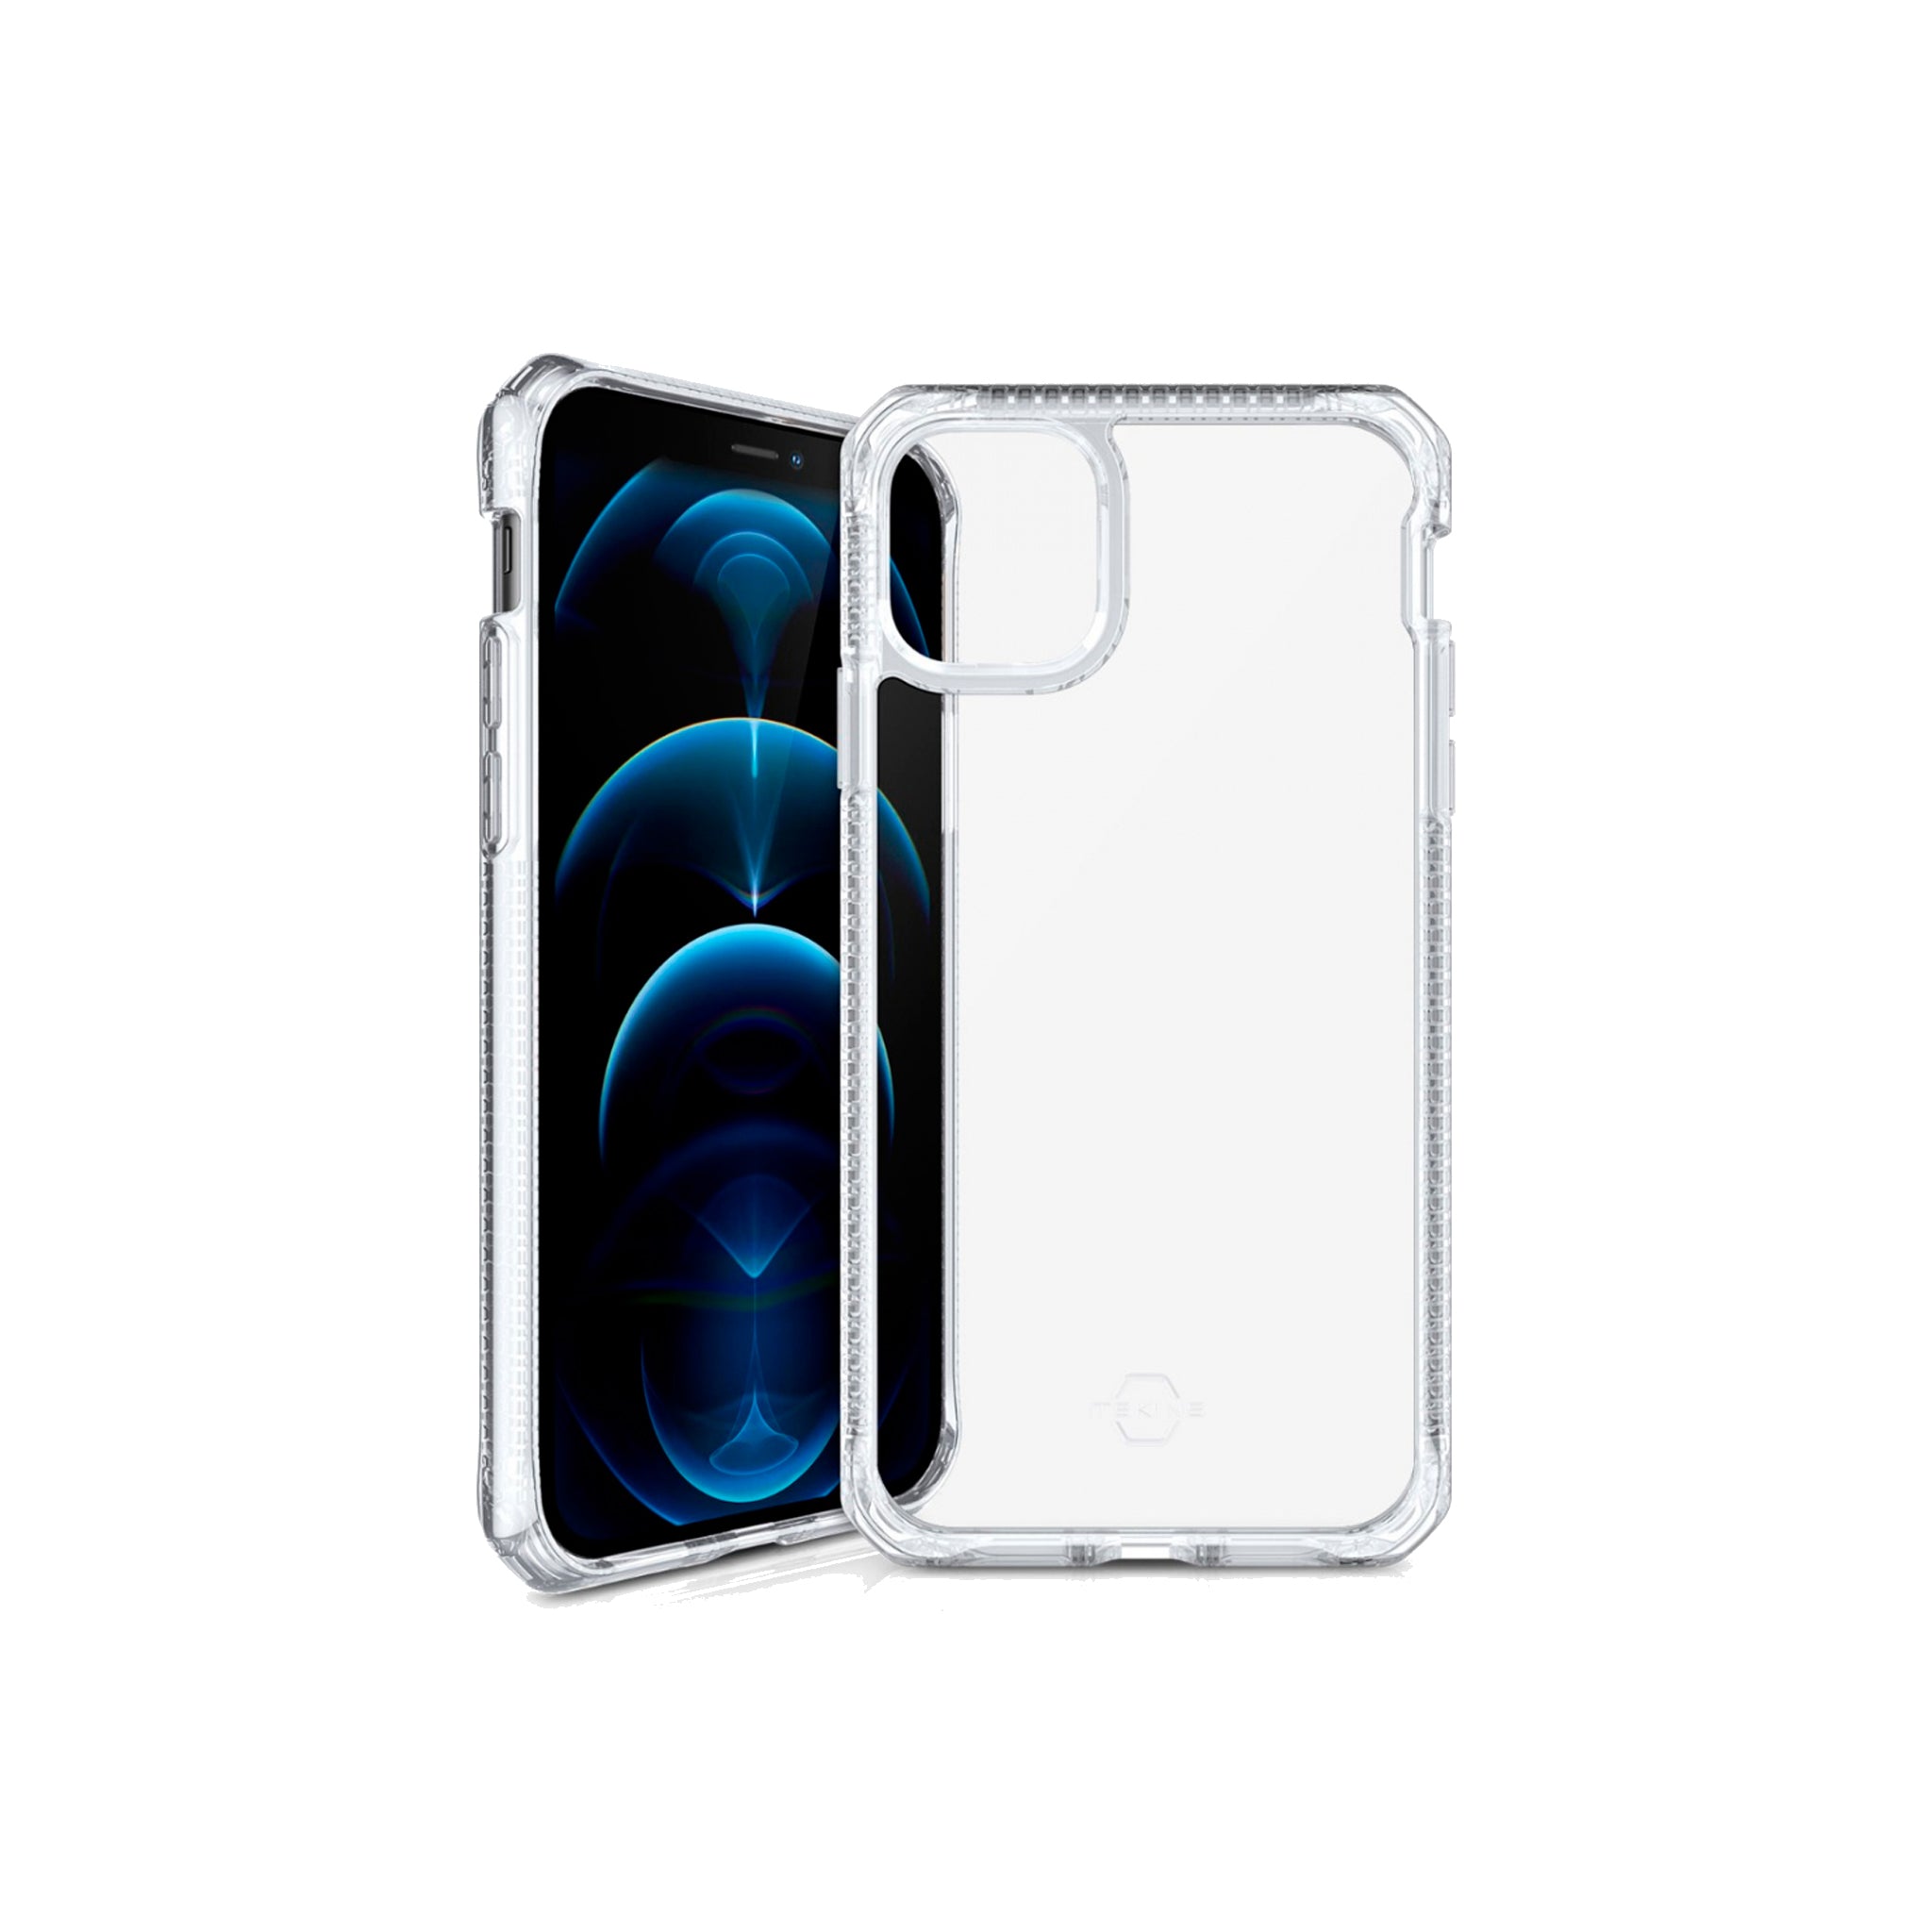 Itskins - Hybrid Clear Case For Apple Iphone 12 Pro Max - Transparent